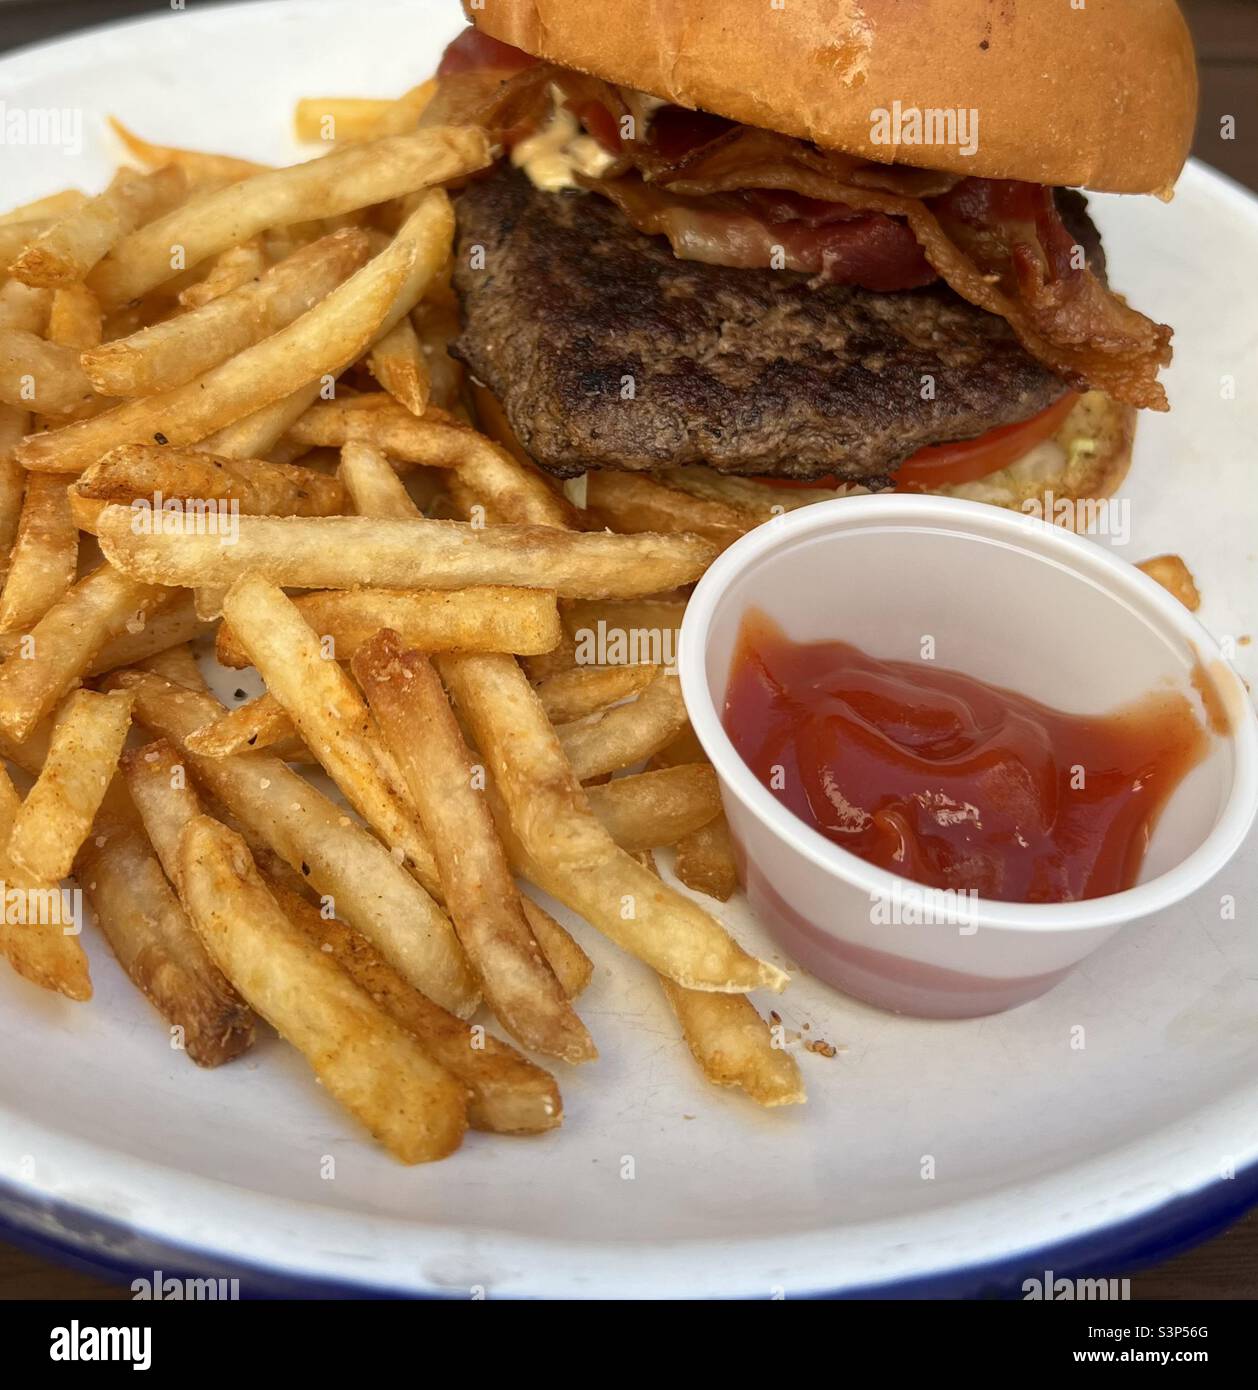 Bacon burger fries with Ketchup Stock Photo